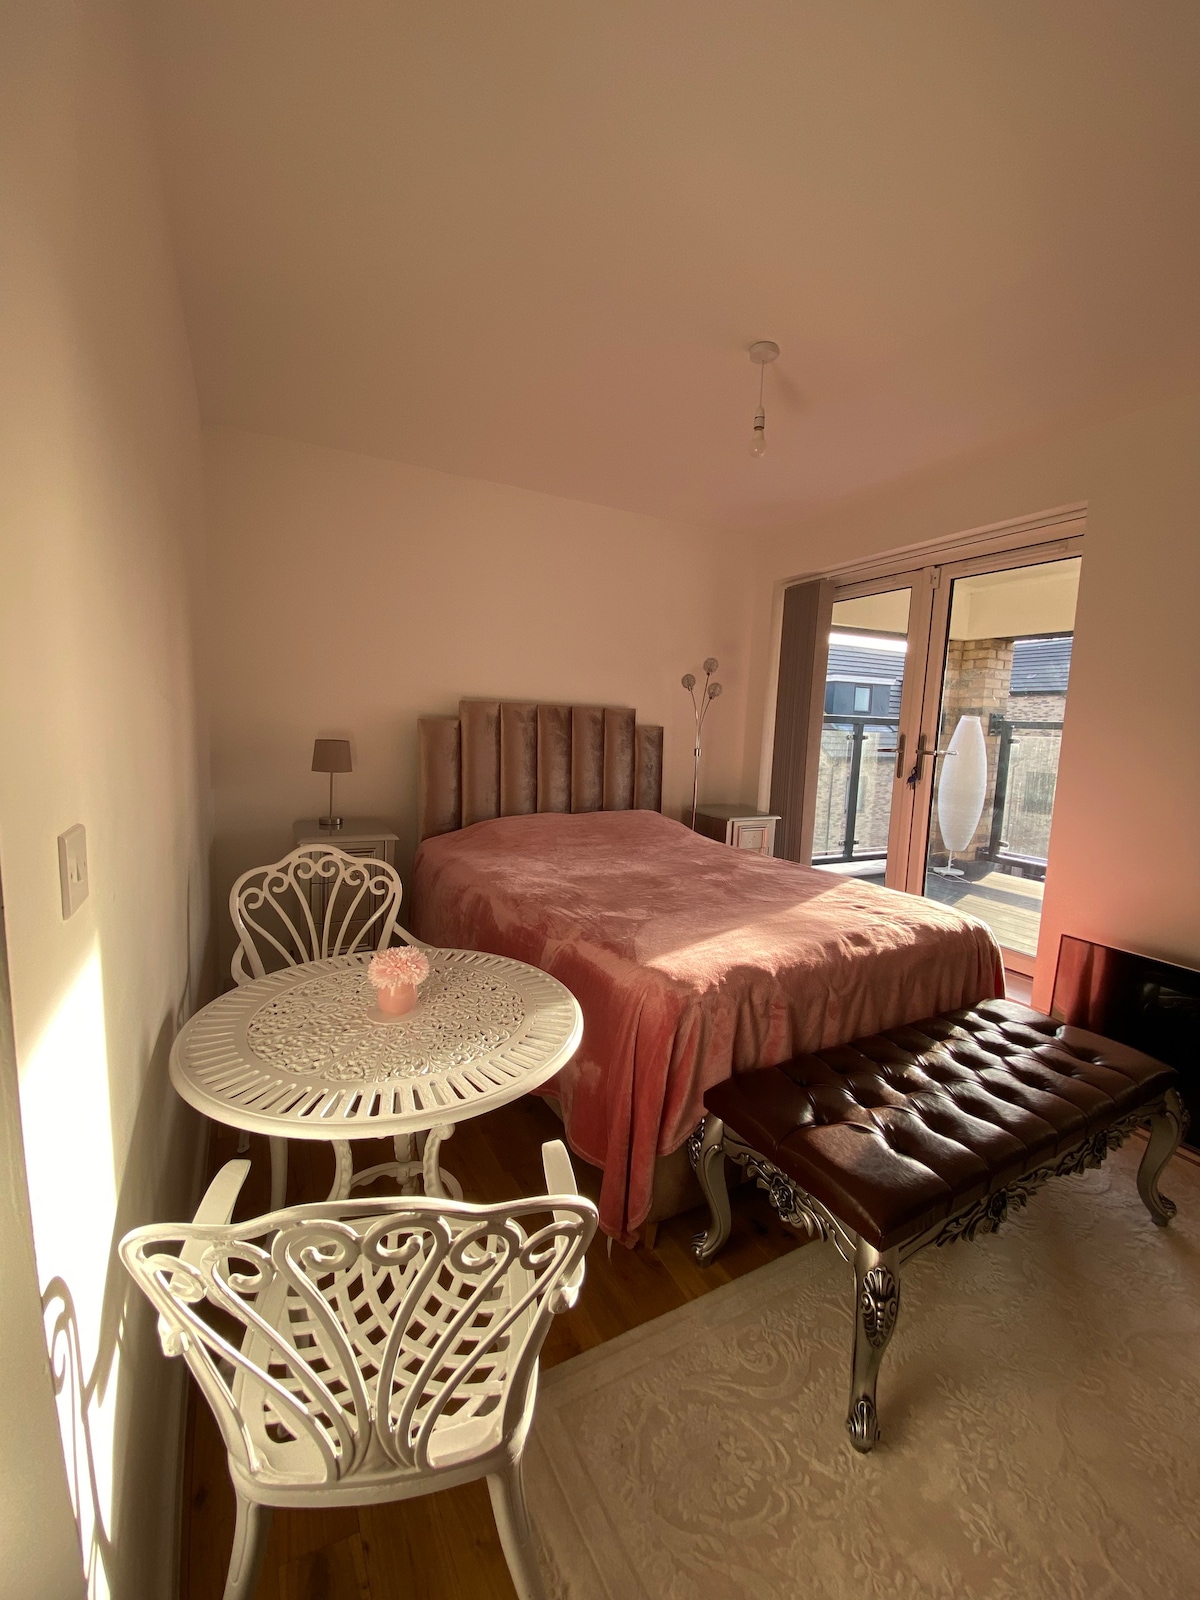 Countryside Luxury House
London-Stansted Airport